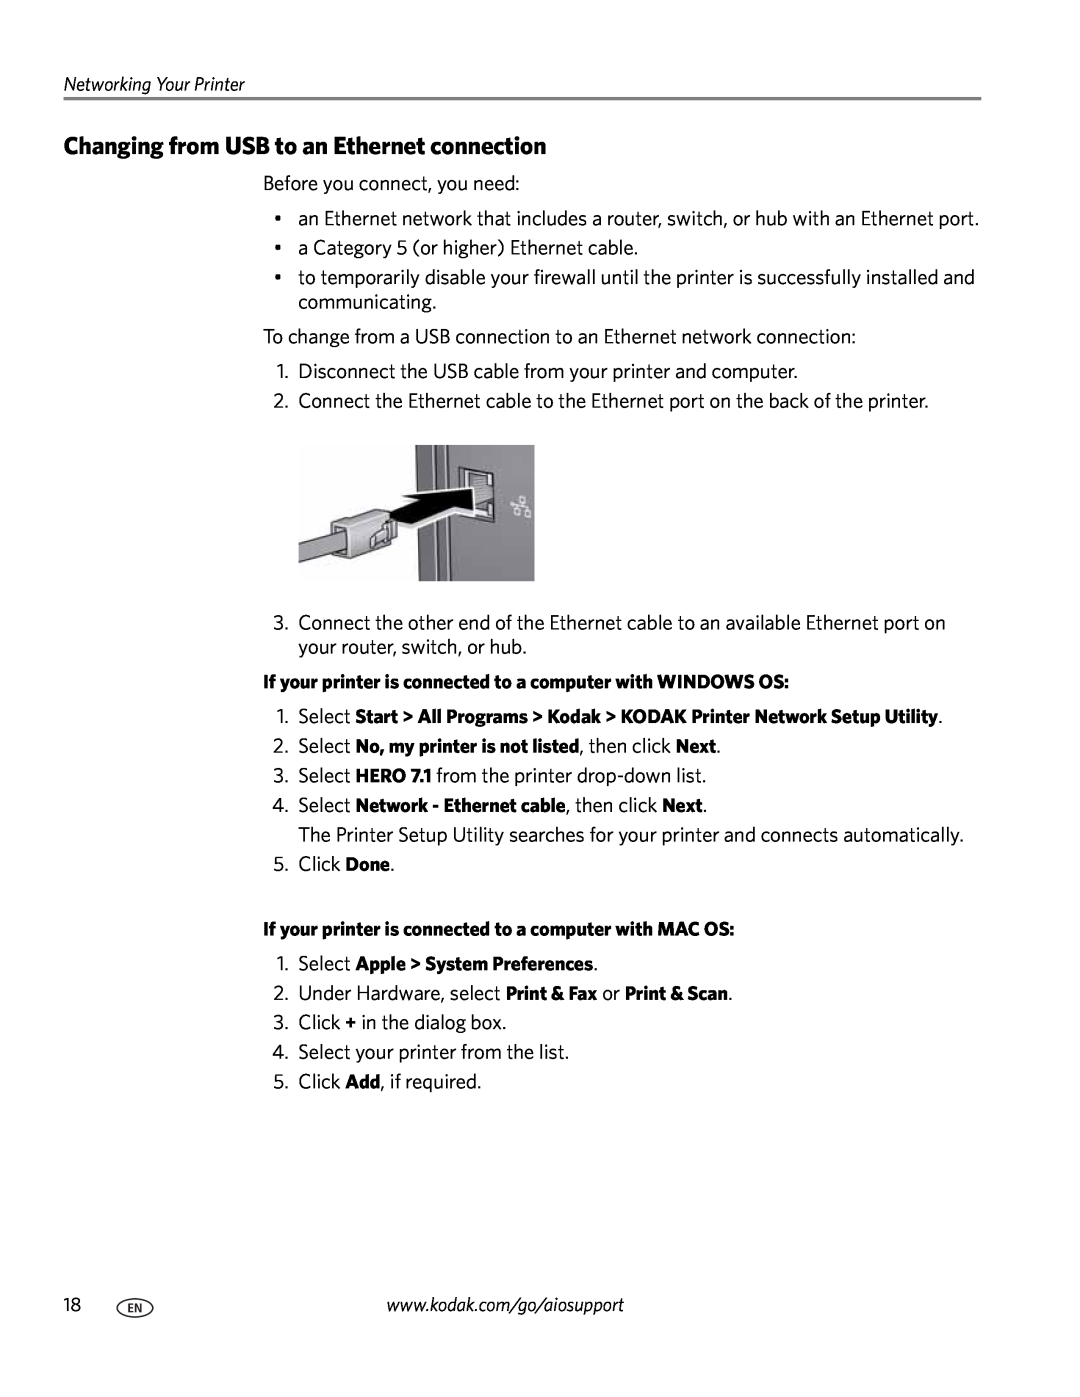 Kodak 7.1 manual Changing from USB to an Ethernet connection 